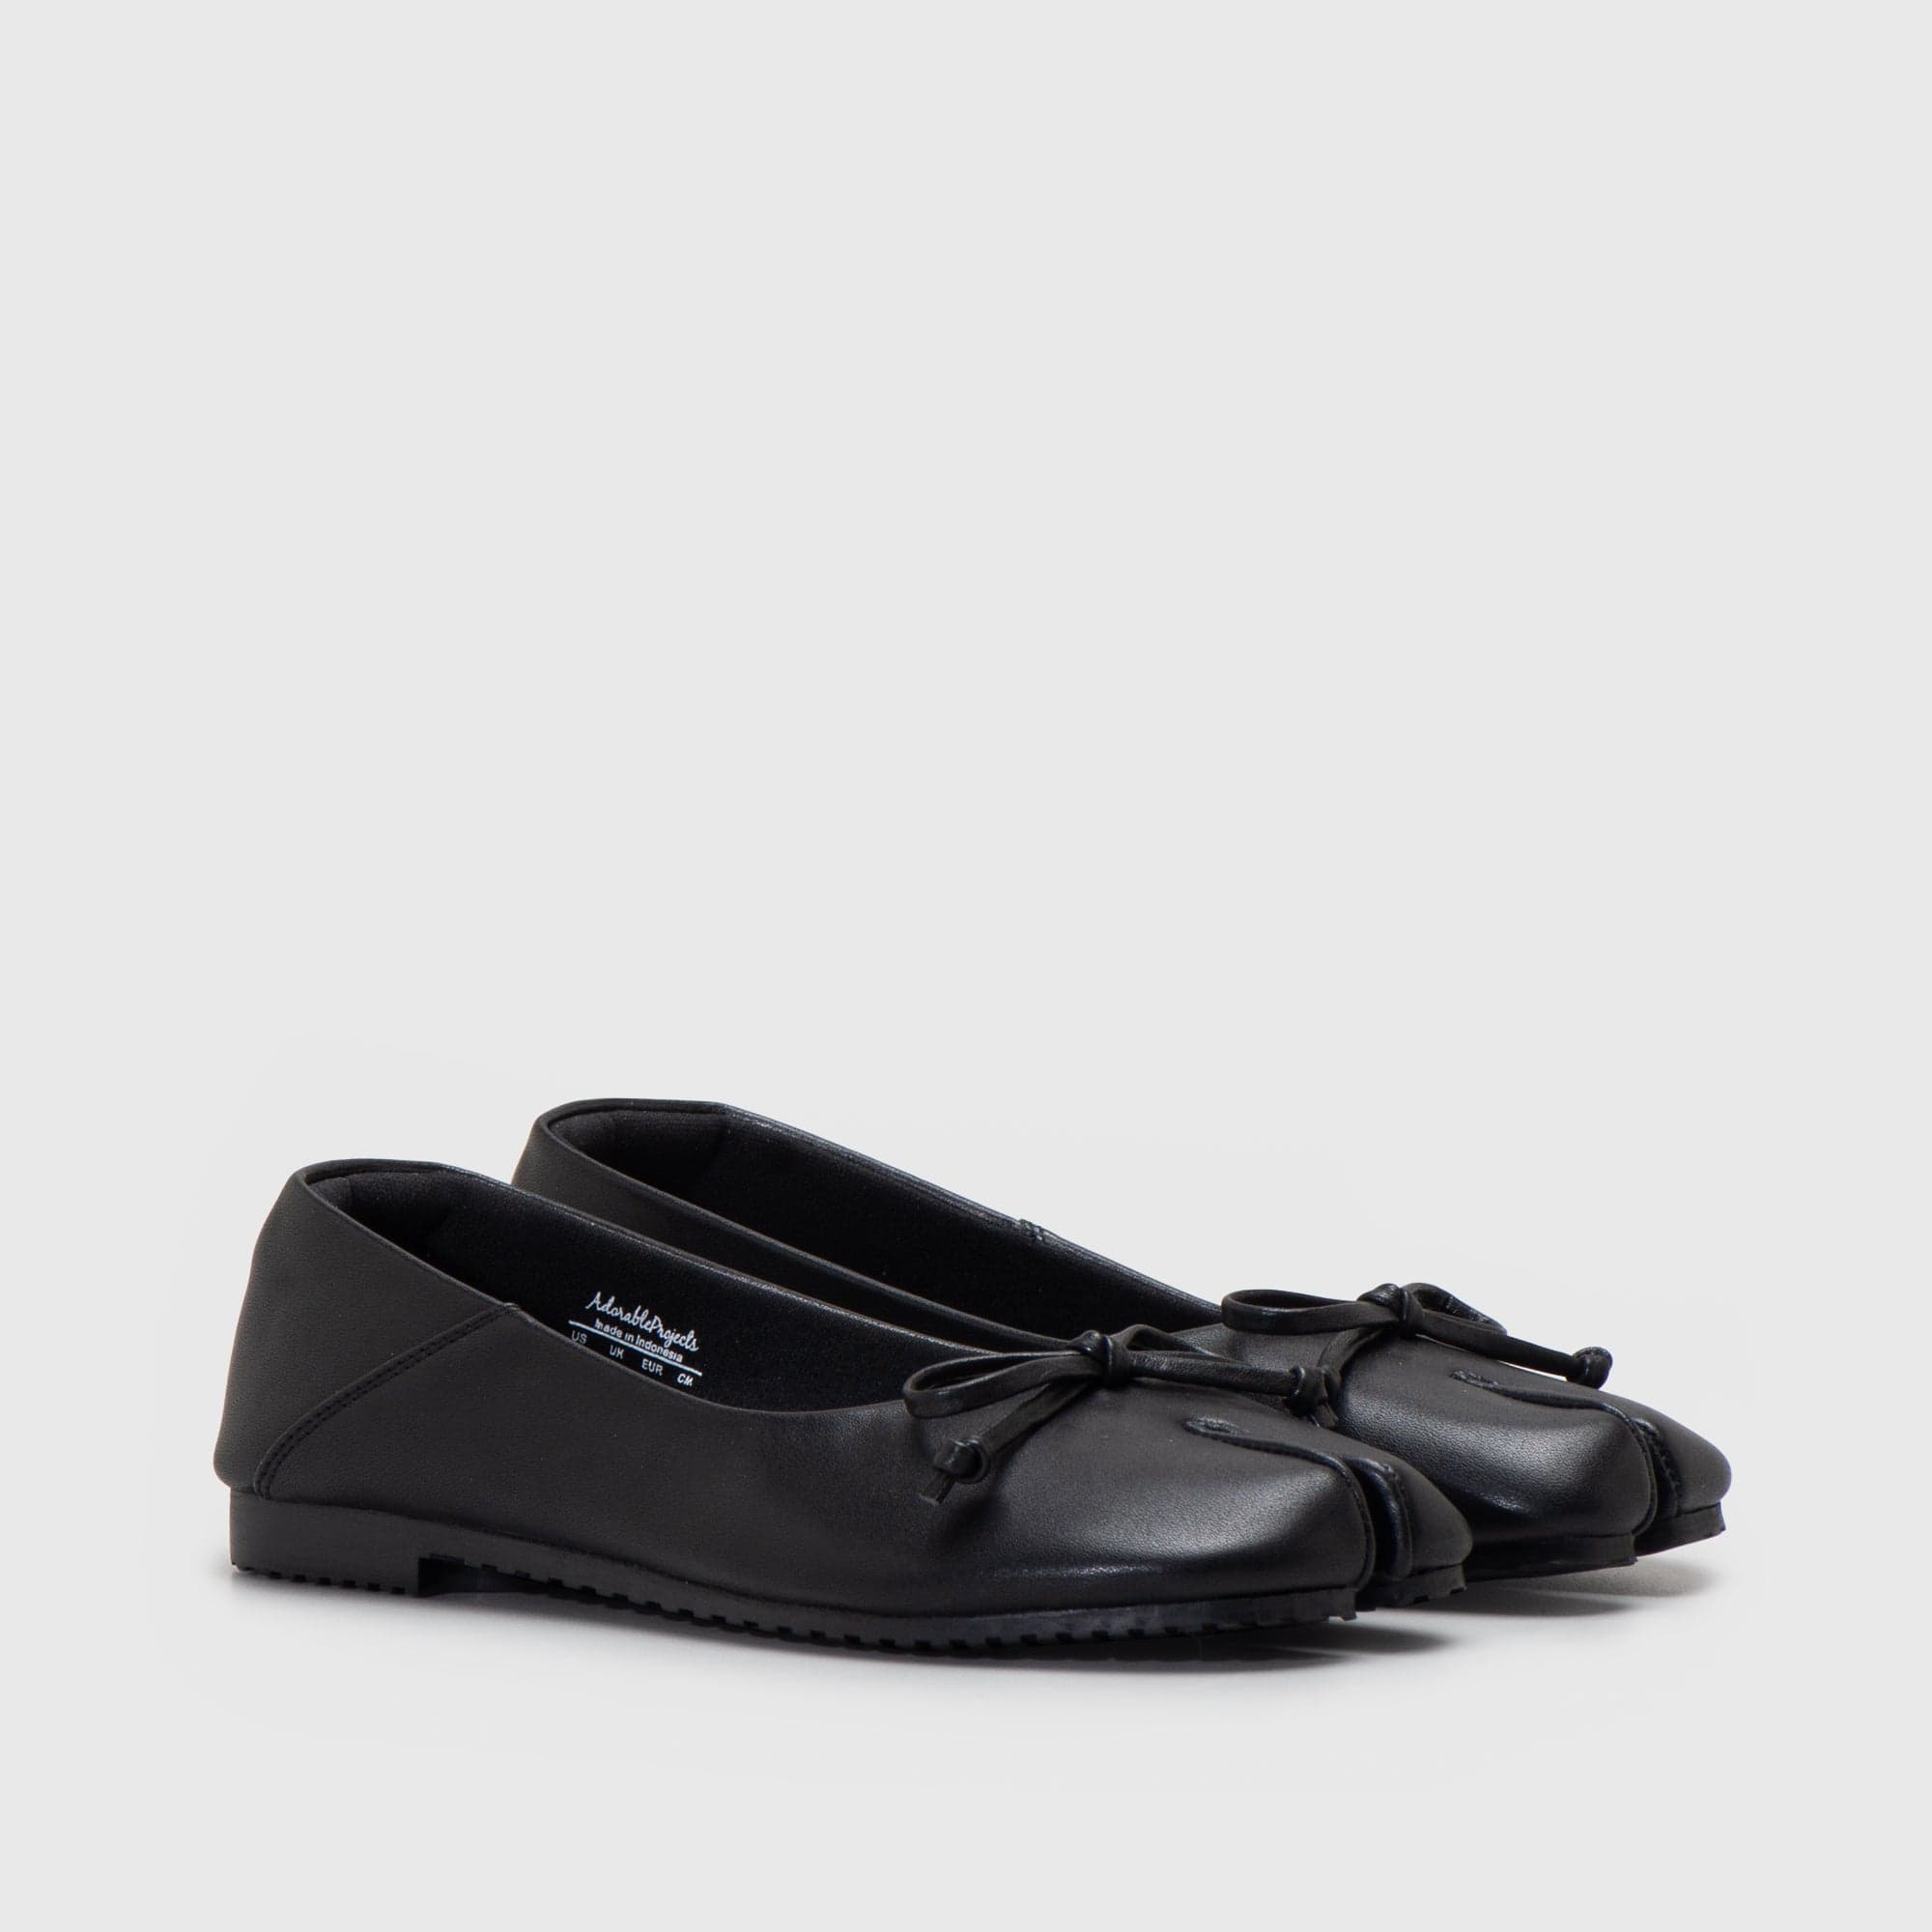 Adorable Projects Official Flat shoes Evodia Flat Shoes Black